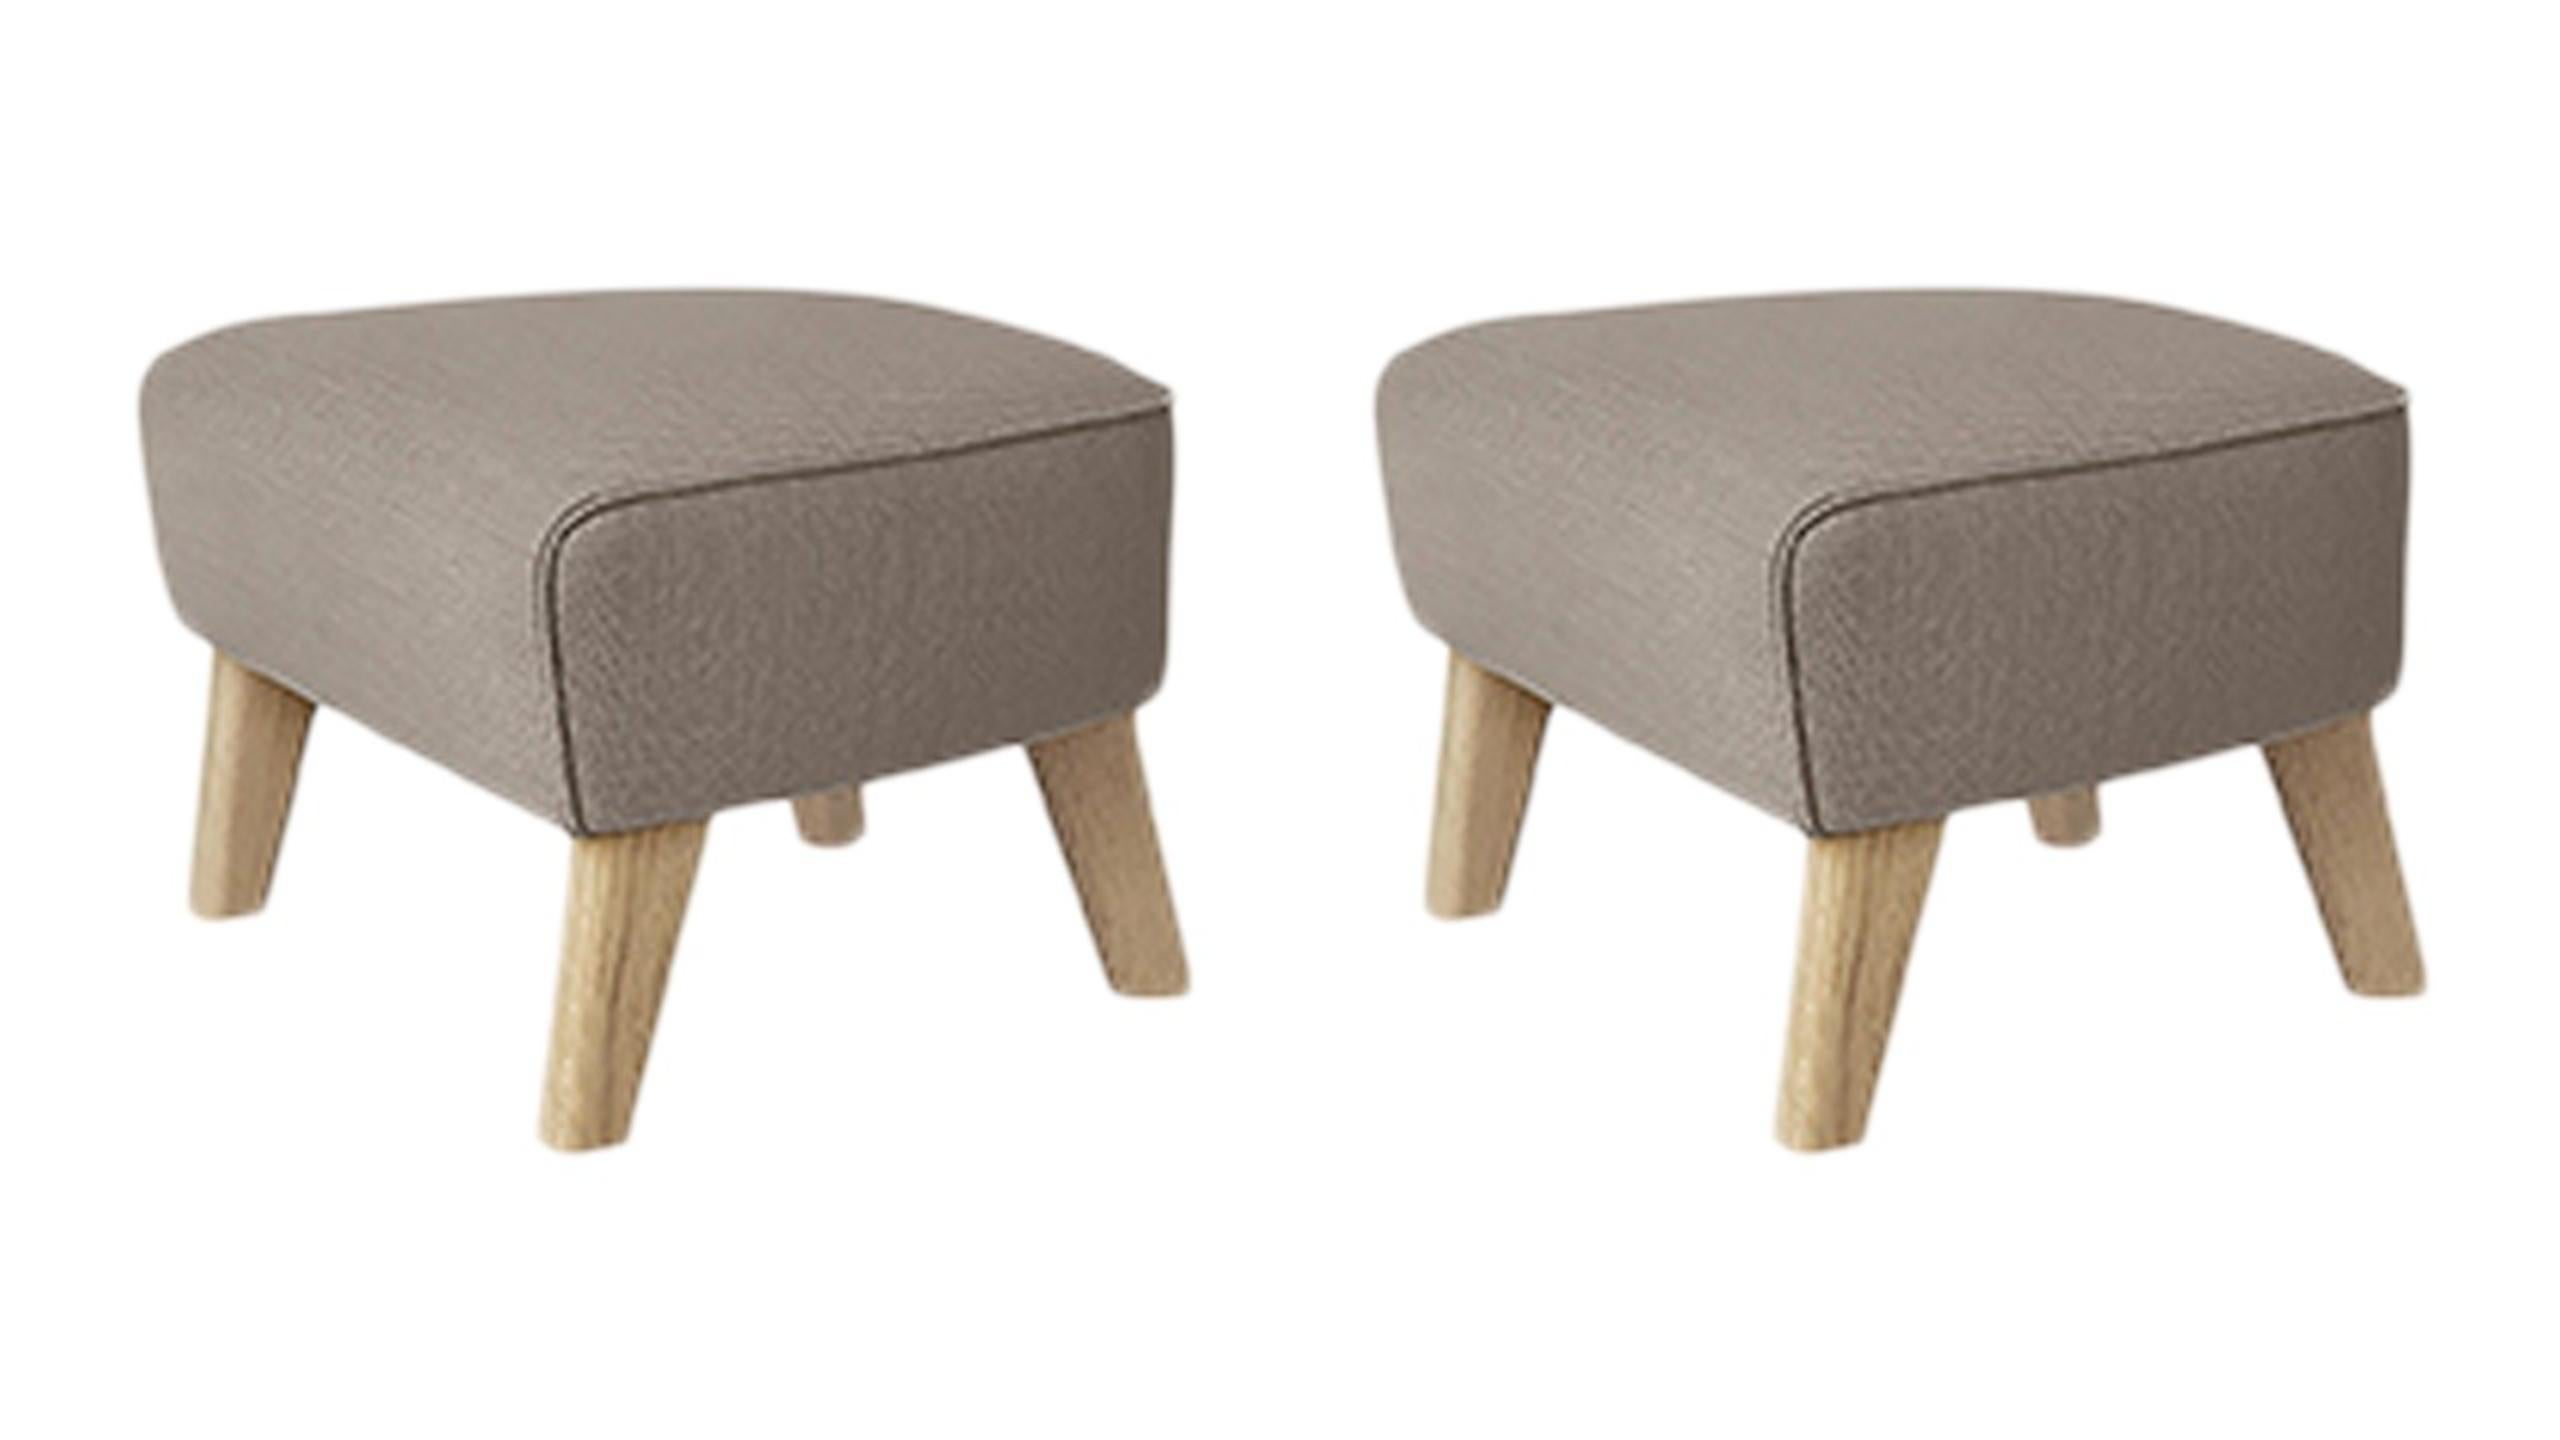 Set of 2 light beige, natural Oak Raf Simons Vidar My Own chair footstool by Lassen
Dimensions: w 56 x d 58 x h 40 cm 
Materials: Textile
Also Available: Other colors available.

The My Own Chair footstool has been designed in the same spirit